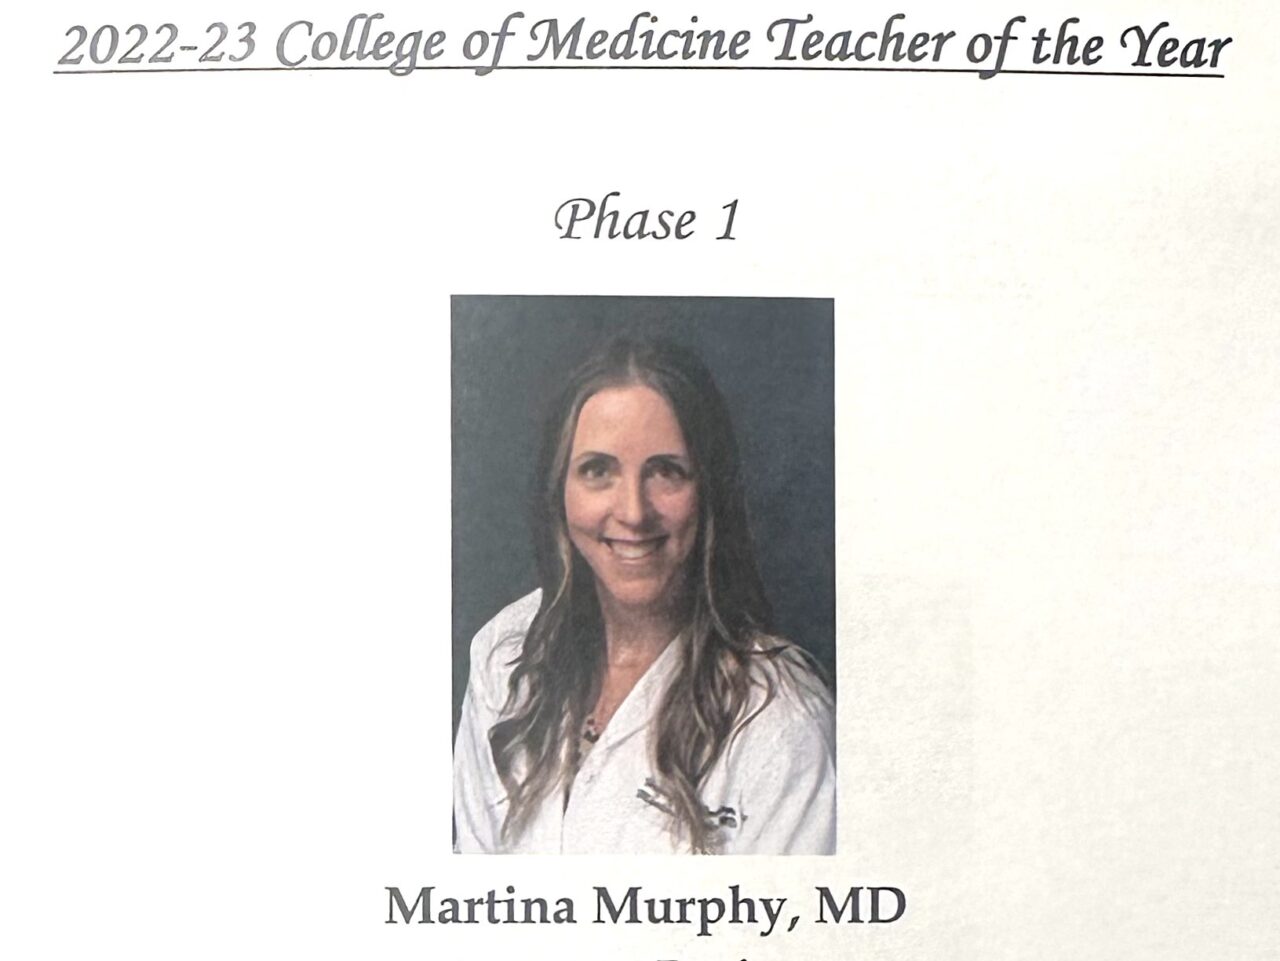 Martina Murphy: Grateful to the UF Medicine class of 2024 for this incredible honor